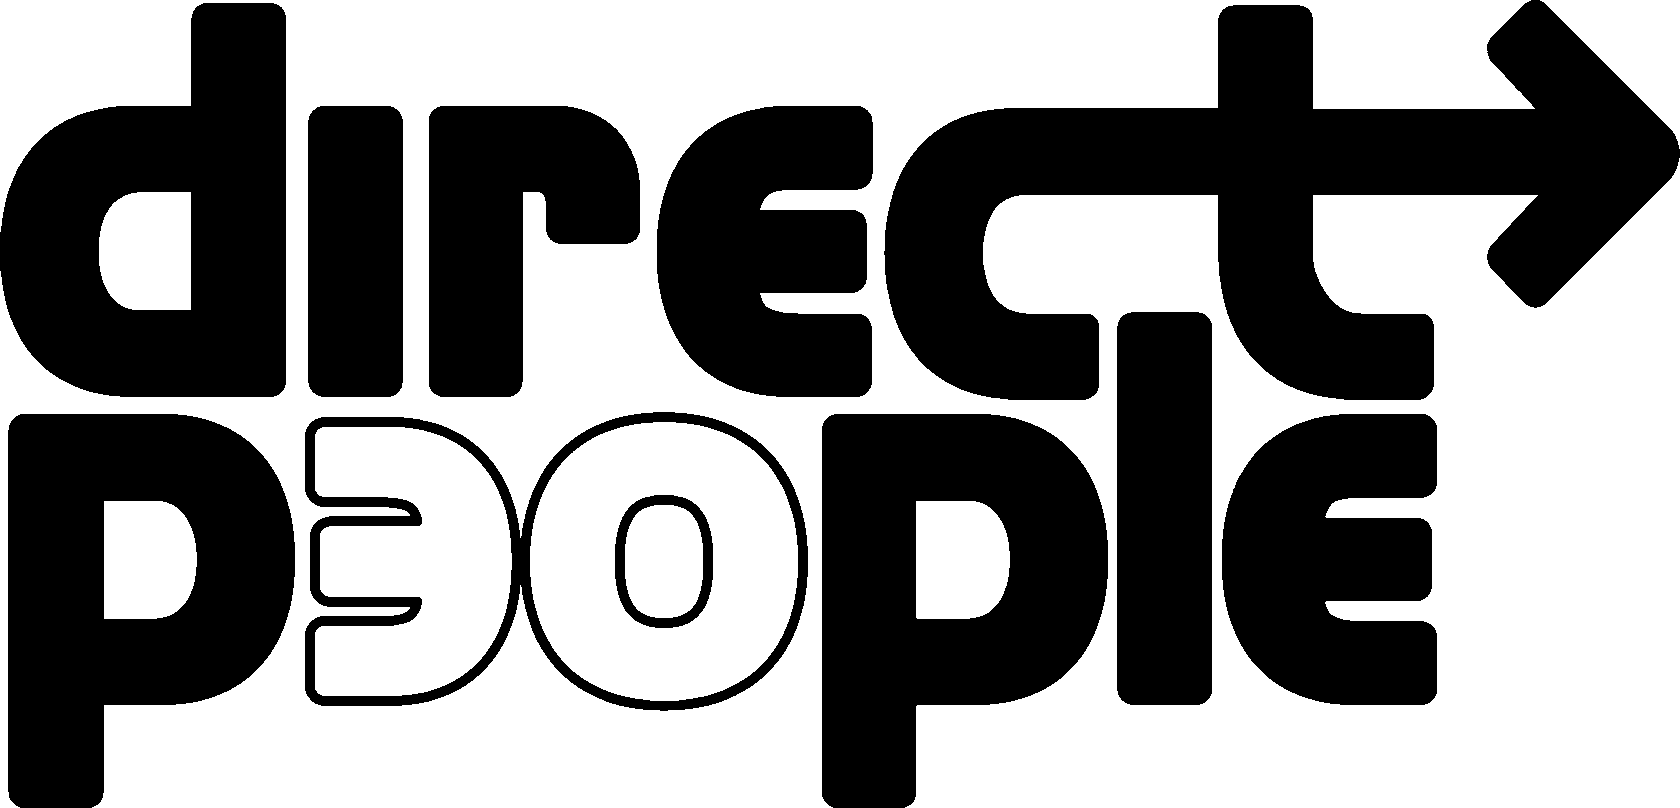 Direct People Innovation